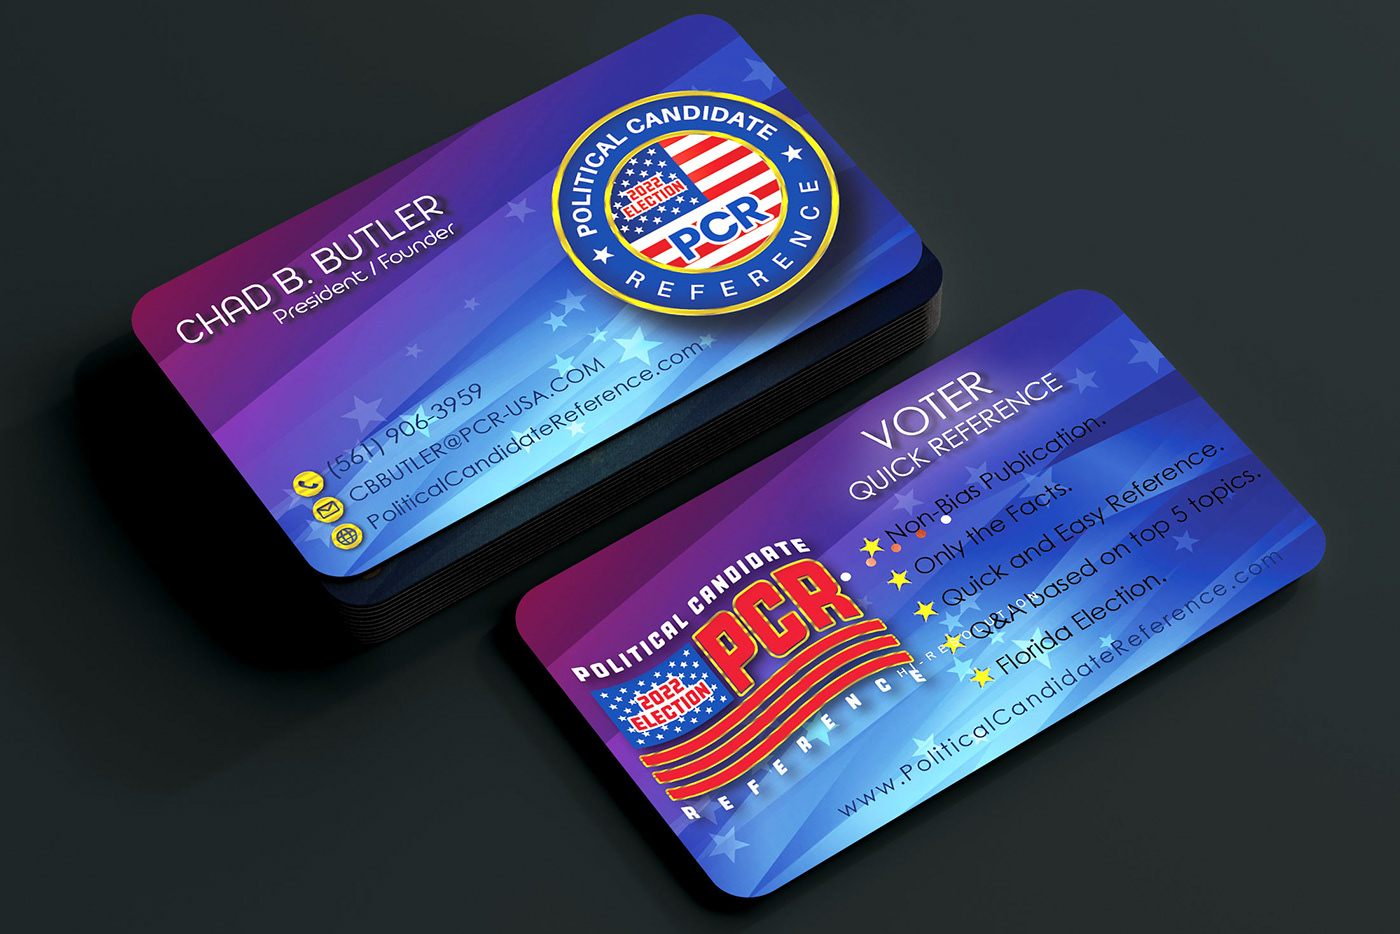 business card butler chad CHAD B BUTLER political Political Candidate president business card US Candidate visiting card vote